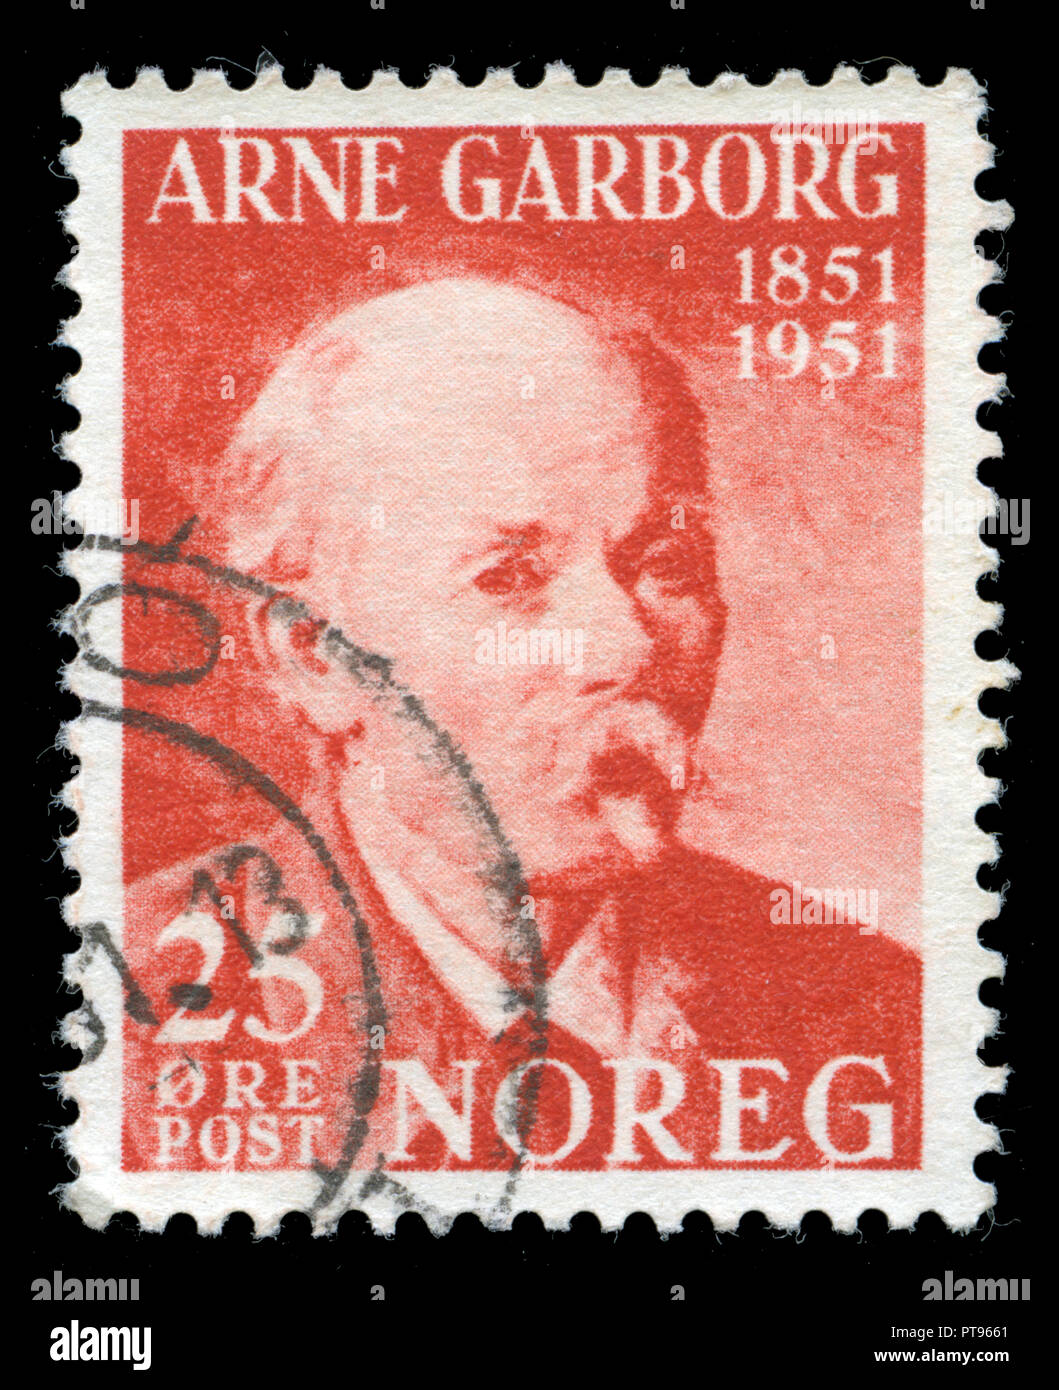 Postmarked stamp from Norway in the People series issued in 1951 Stock Photo